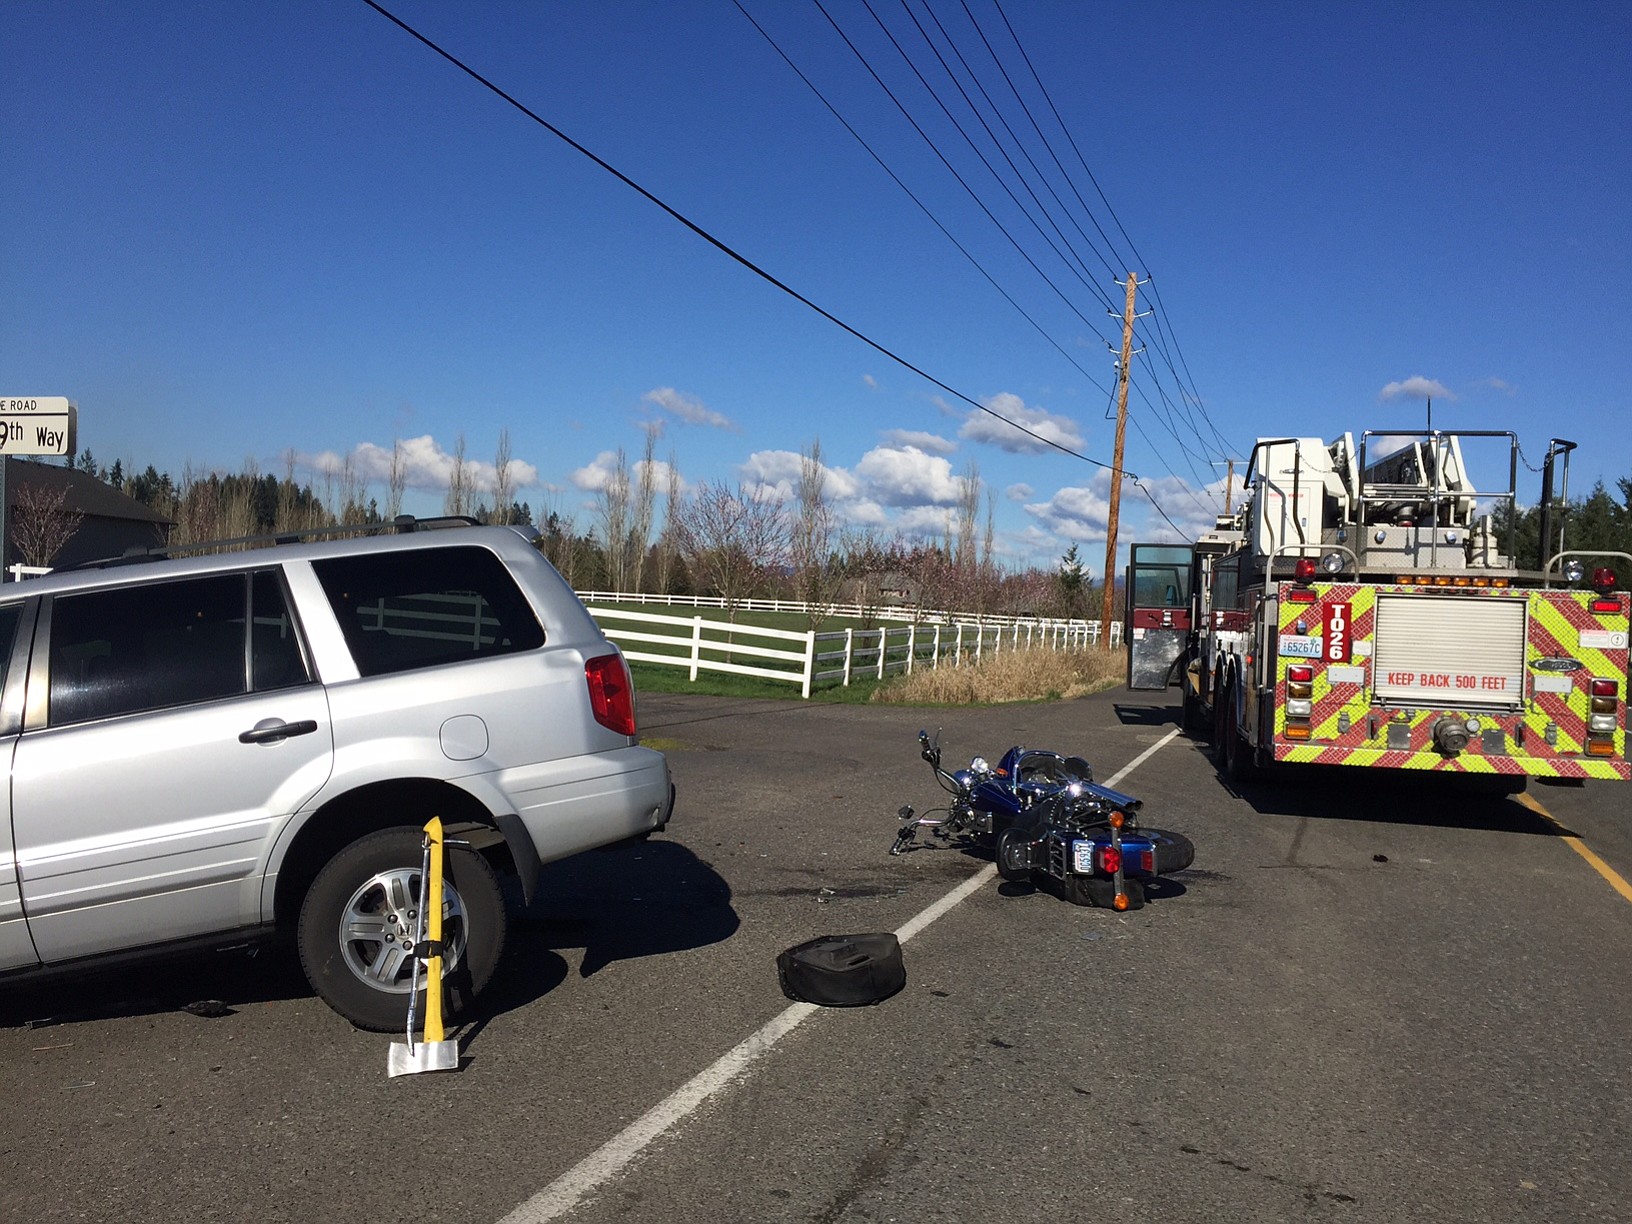 A motorcycle rider died Saturday morning in a traffic collision northwest of Battle Ground on Northeast 72nd Avenue.